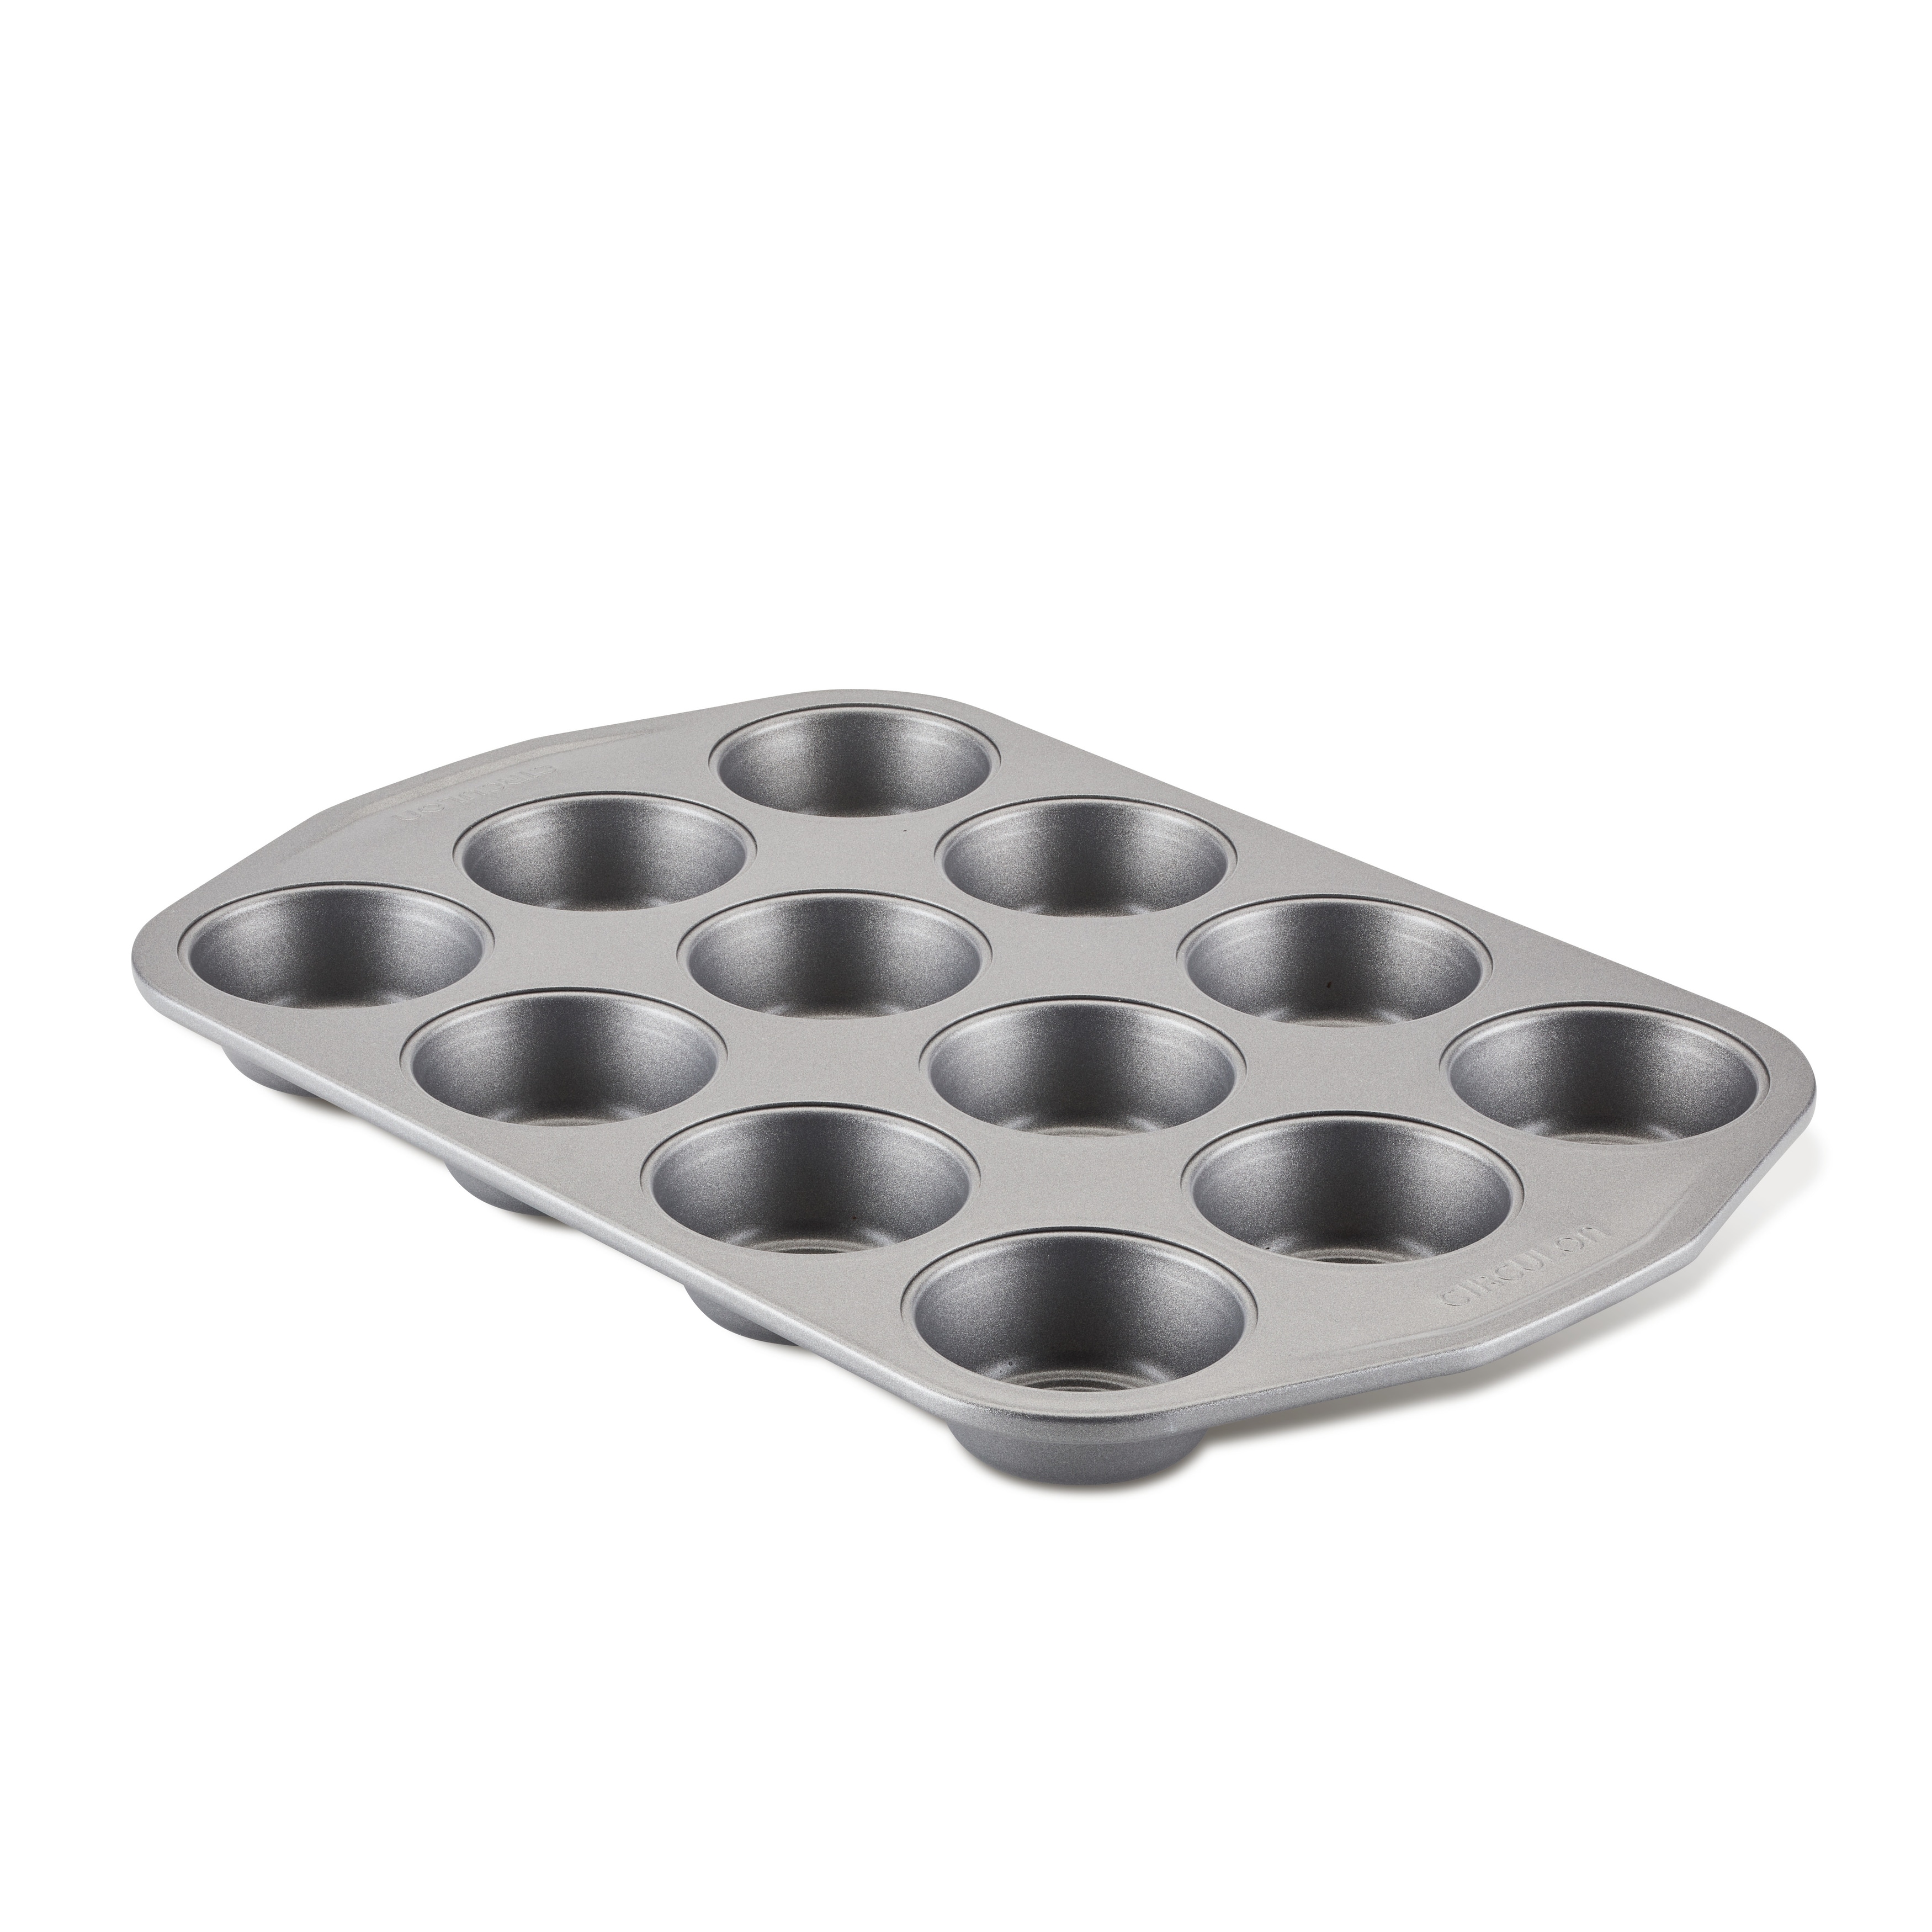 https://ak1.ostkcdn.com/images/products/is/images/direct/3b0666d6bd96b42f18dc2c17ec187ff02ccdf360/Circulon-Bakeware-Nonstick-Muffin-Pan%2C-12-Cup%2C-Gray.jpg